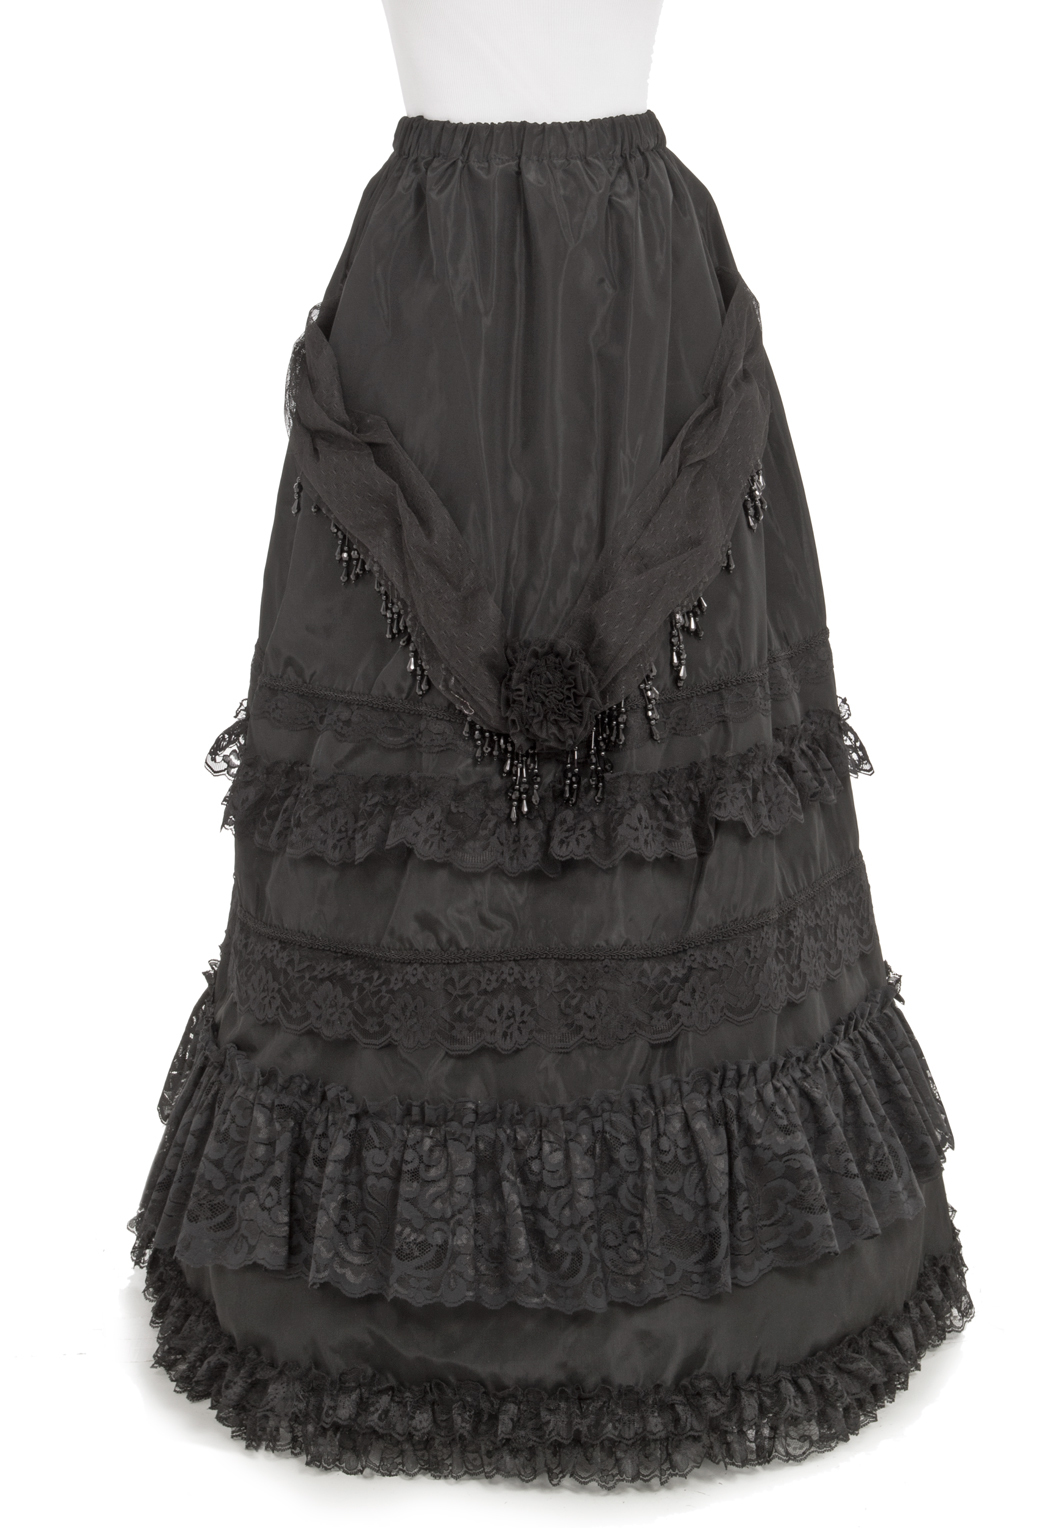 Decorated Lace and Beads Victorian Skirt | Recollections